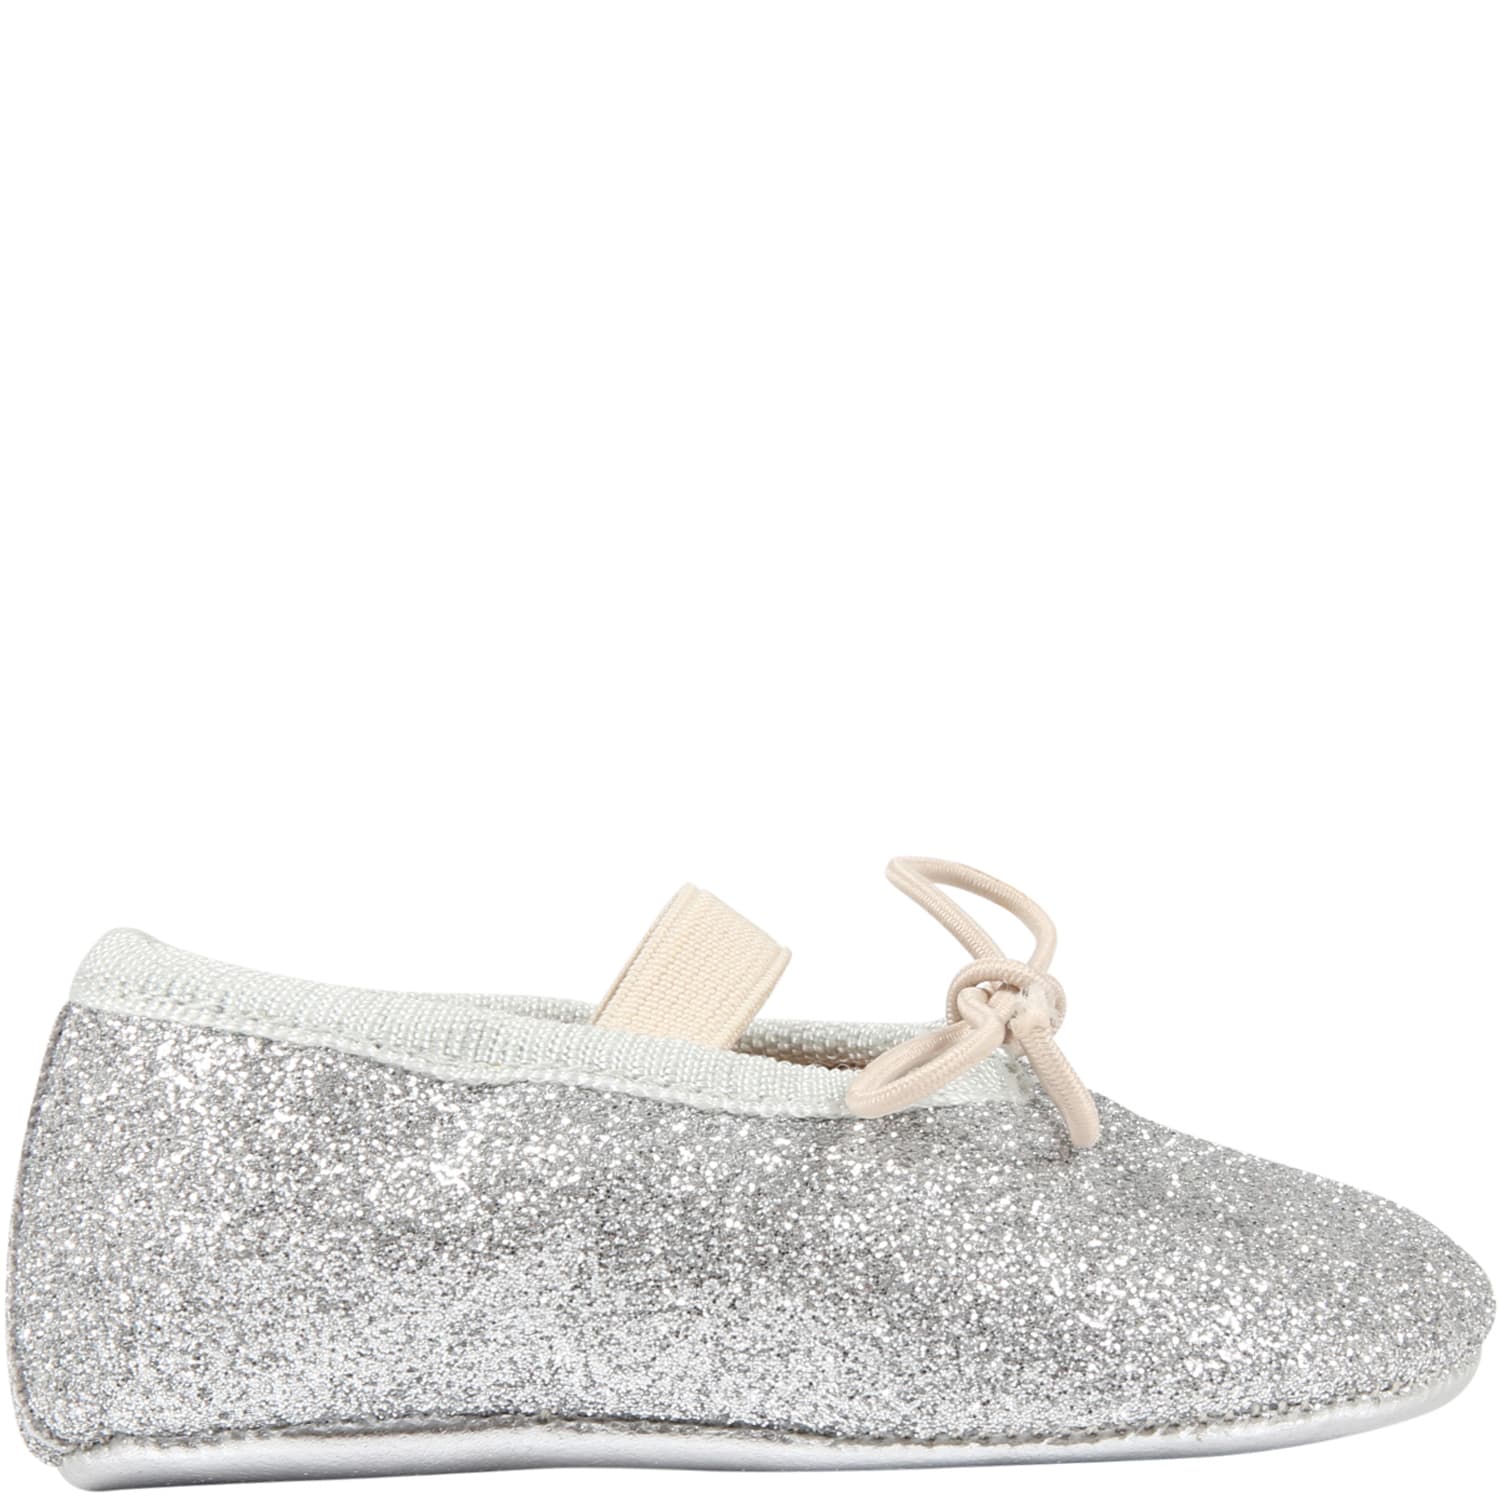 Gallucci Silver Ballet Flats For Baby Girl